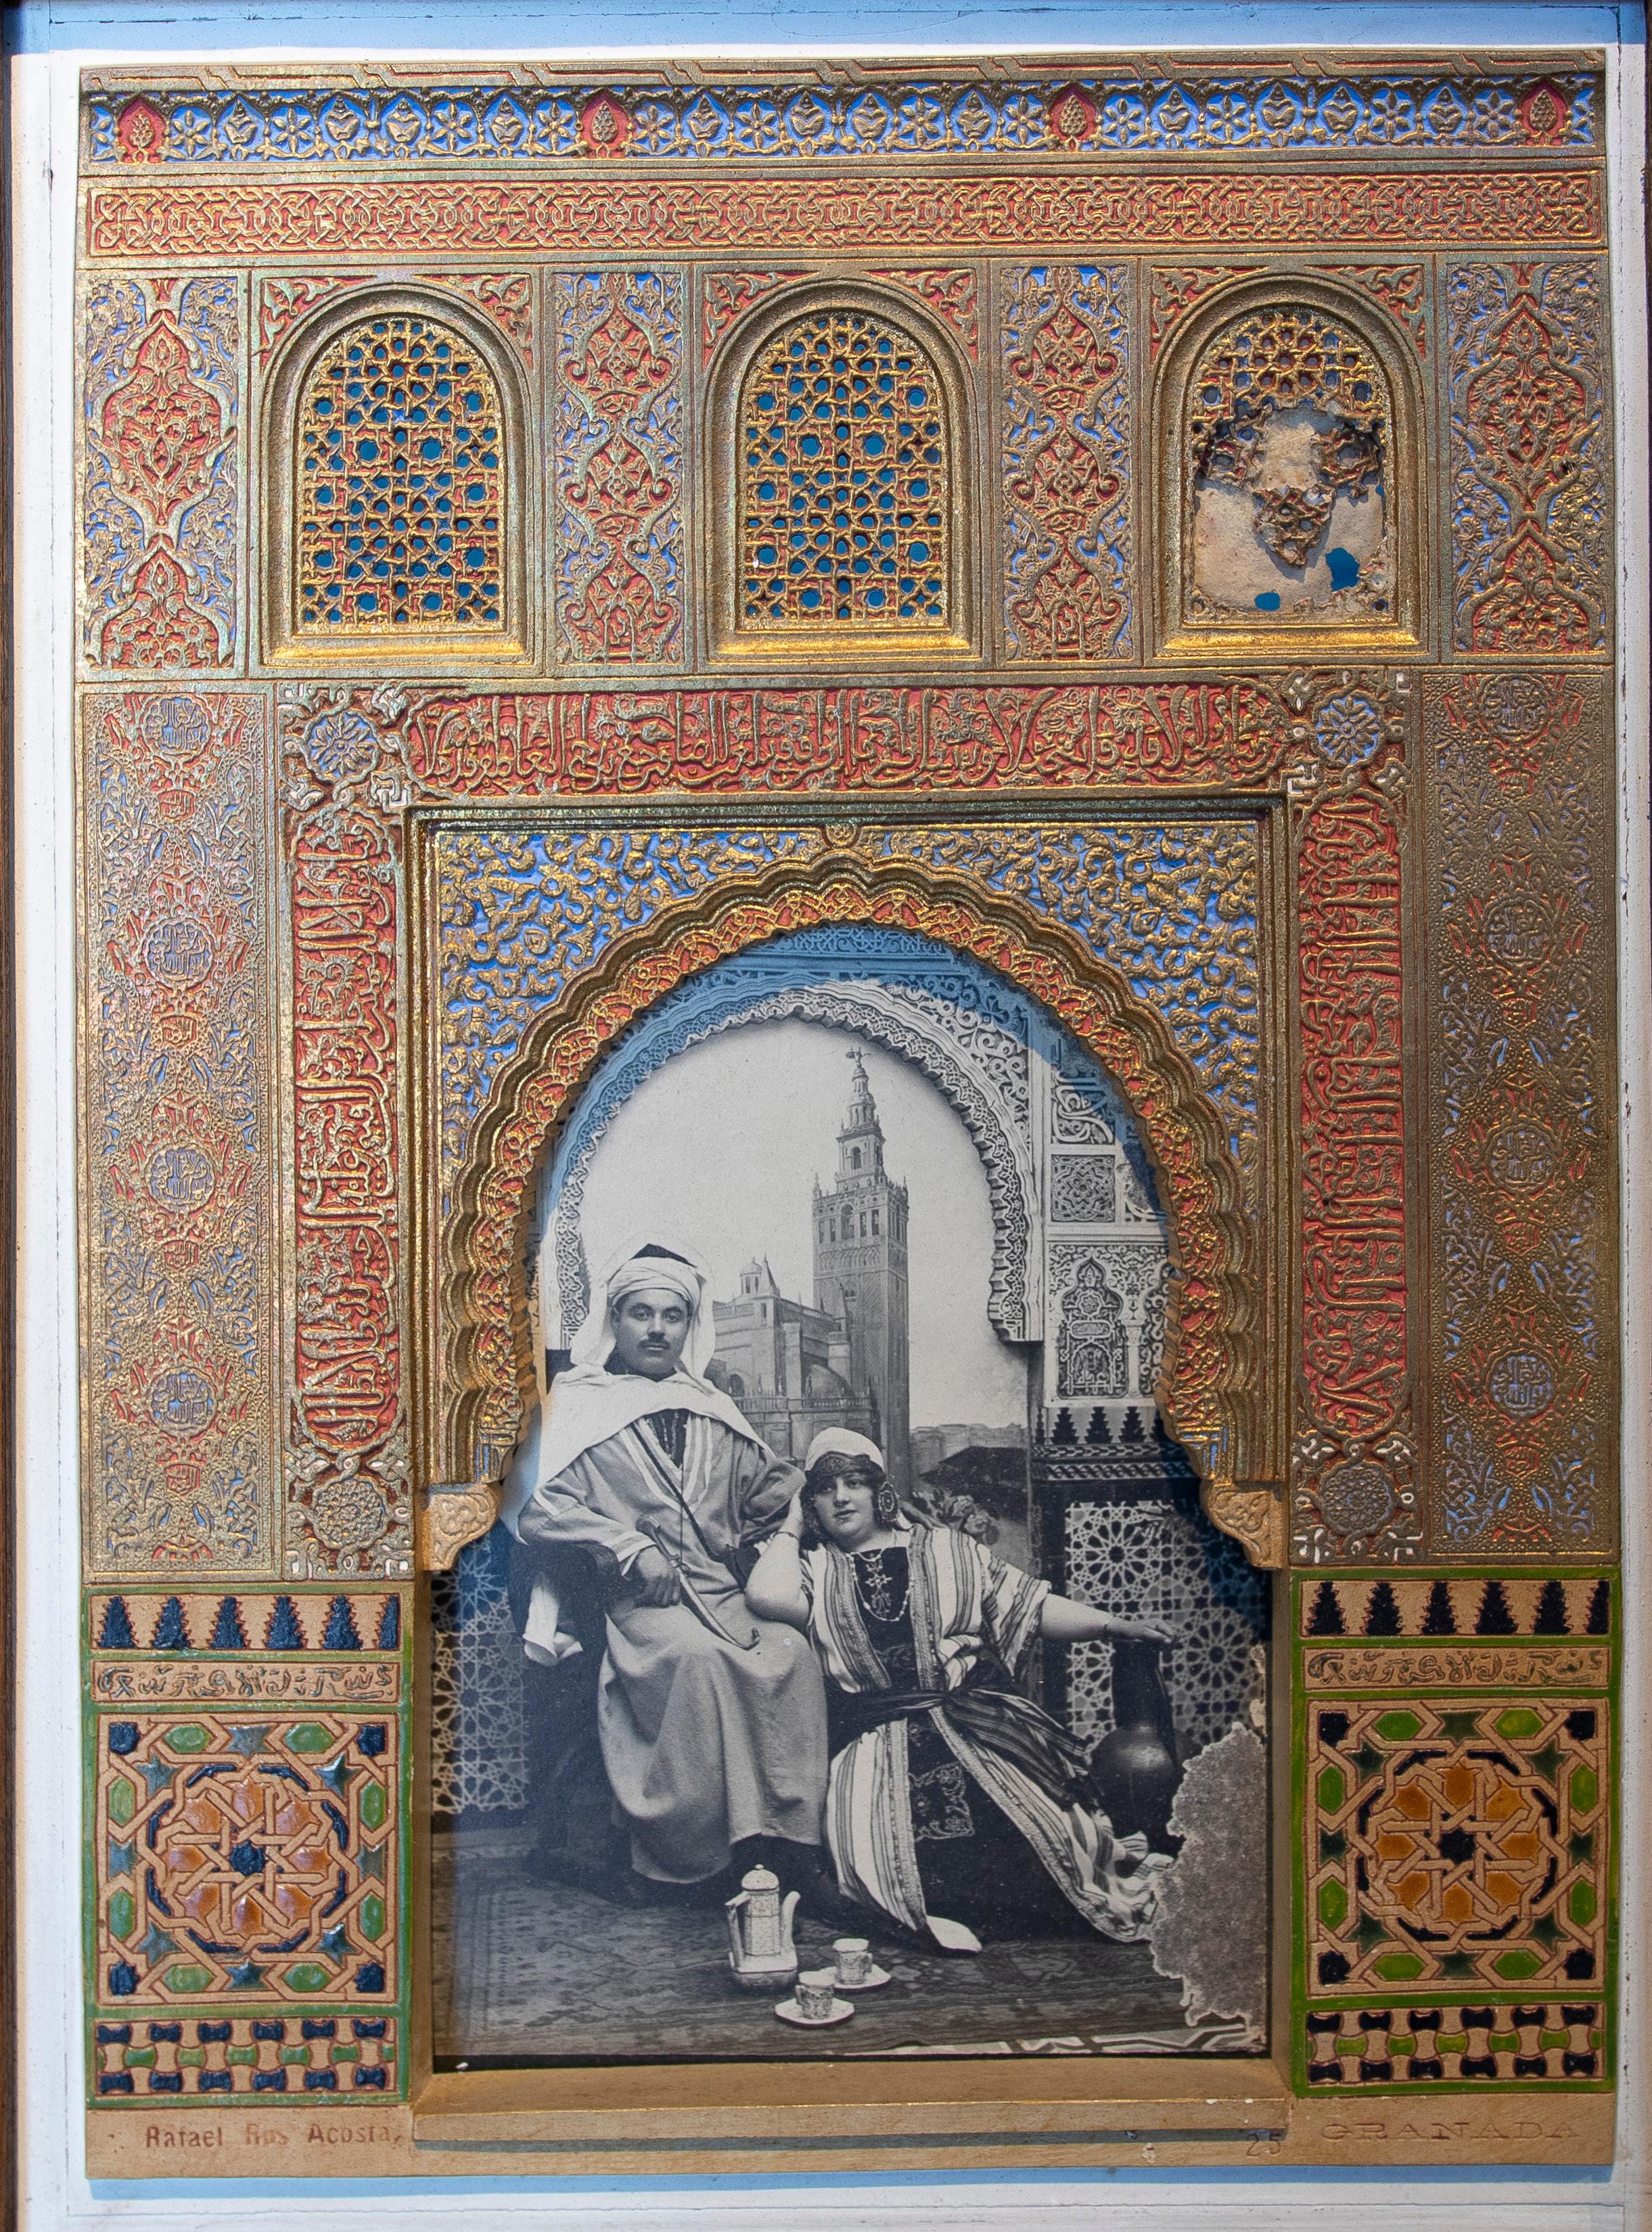 Rare 1960s Spanish detailed stucco relief showcasing Mudéjar art during Al-Andalus, exquisitely framed with a bone inlay decorative frame and with a real photo inset. 

Interior dimensions: 36 x 23 cm.